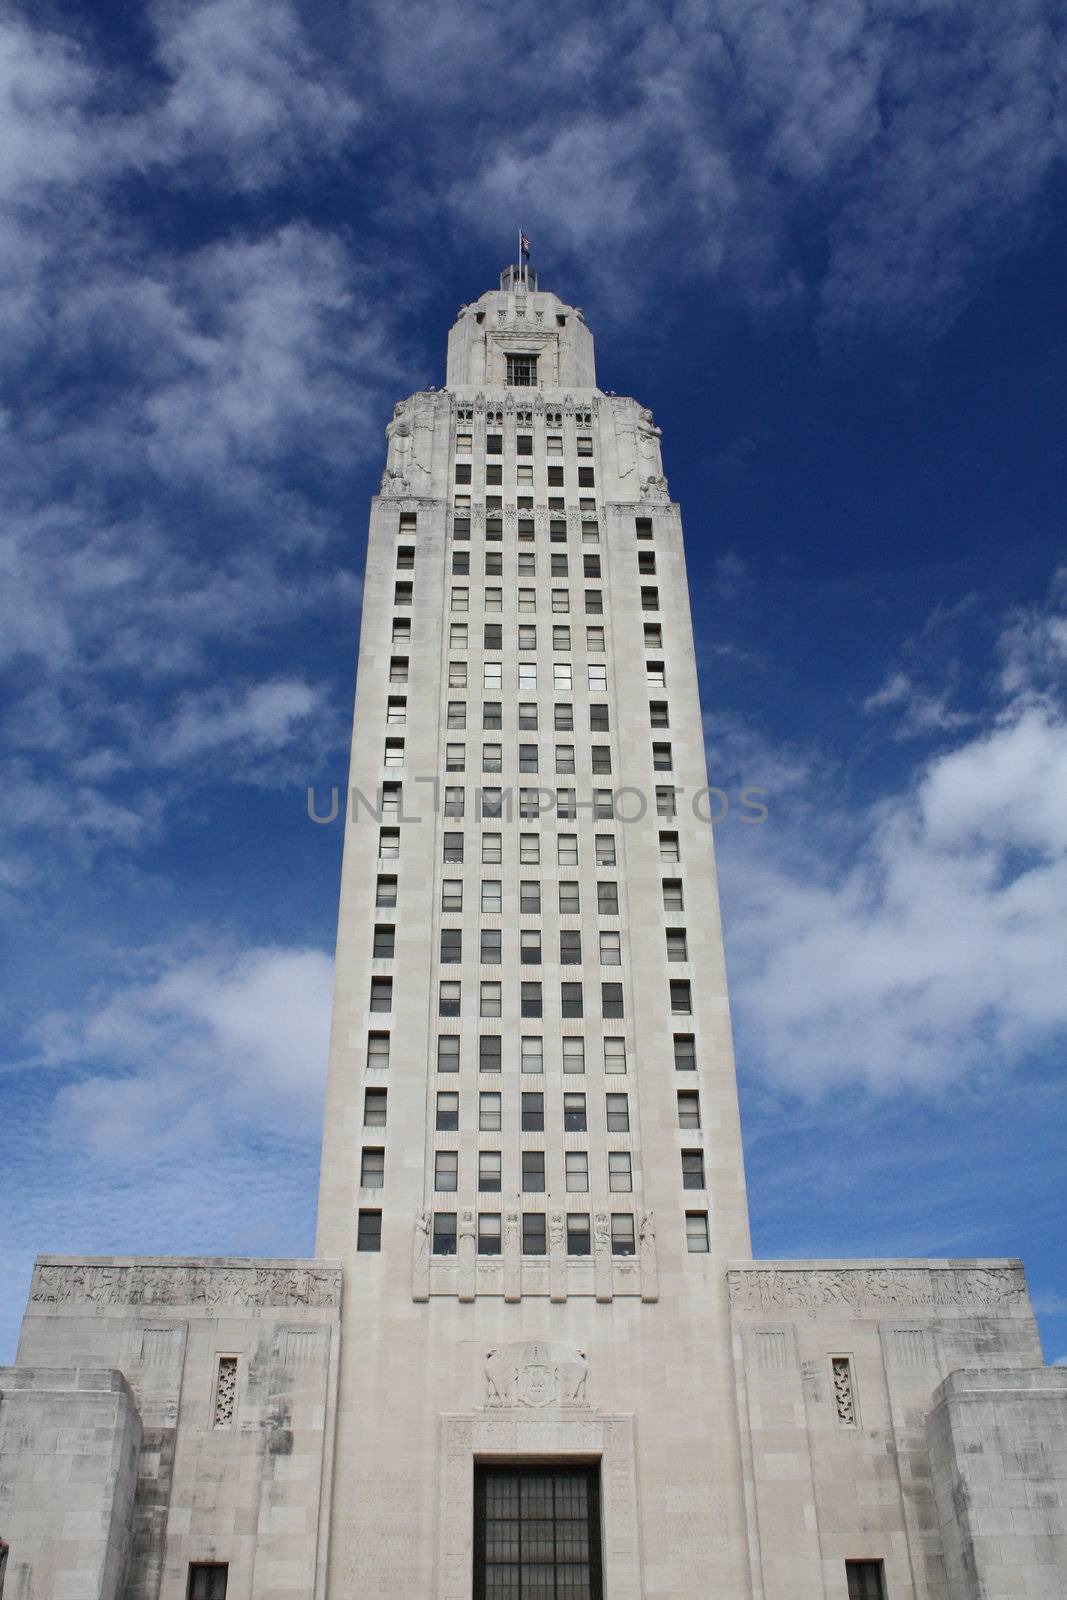 Louisiana State Capital building. Tallest state capital in the USA.
